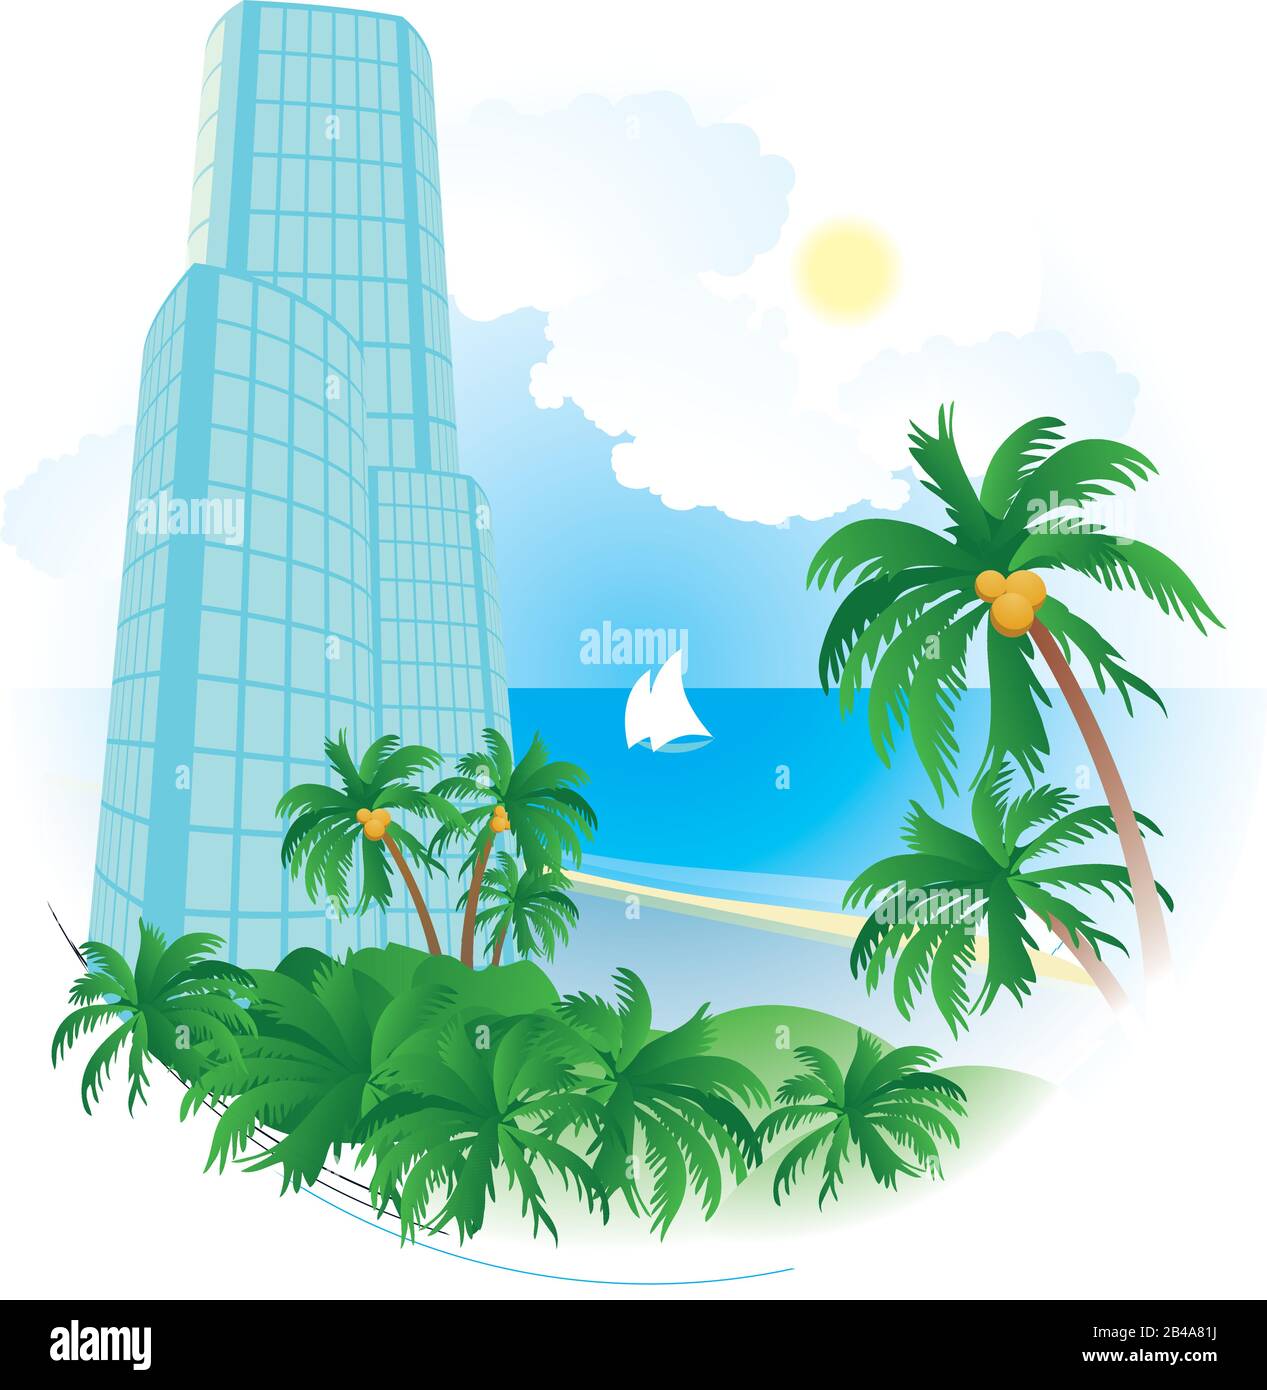 Illustration of a hotel with palm trees, sea and beach, with nice background vector Stock Vector